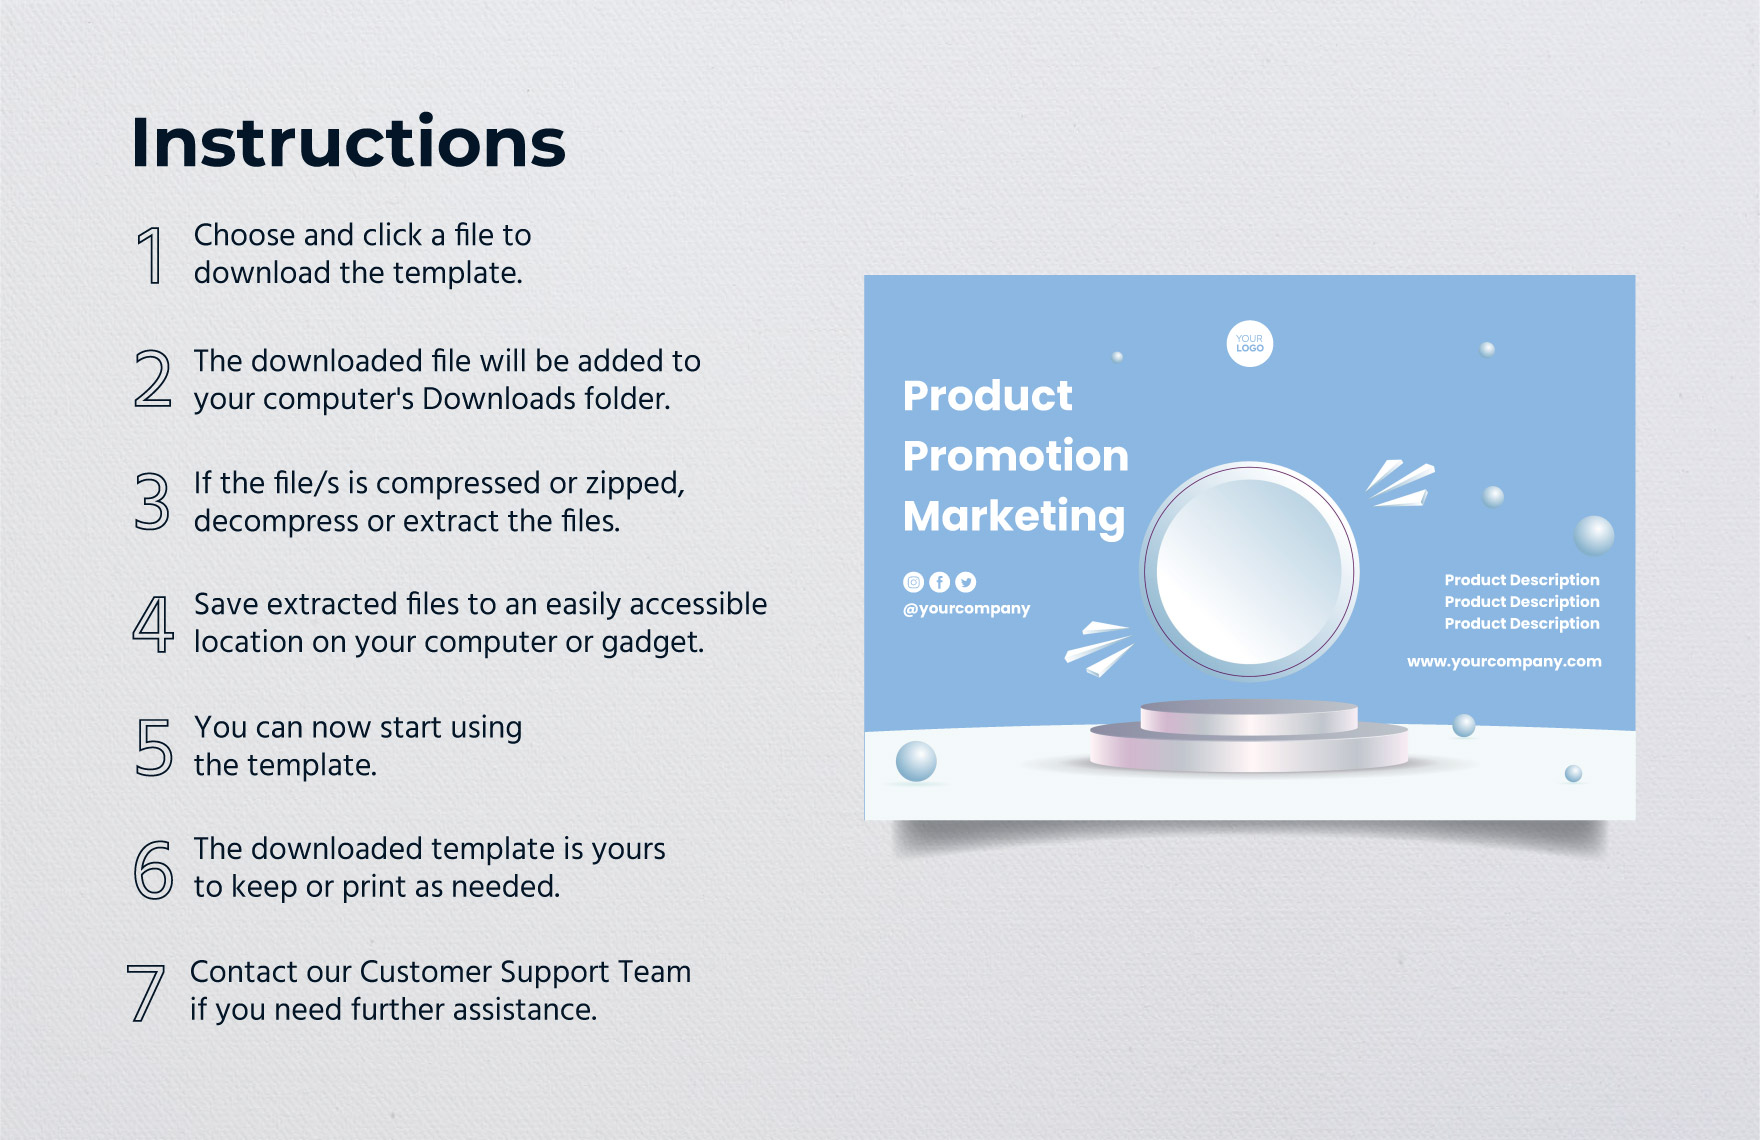 Product Promotion Marketing Sign Template